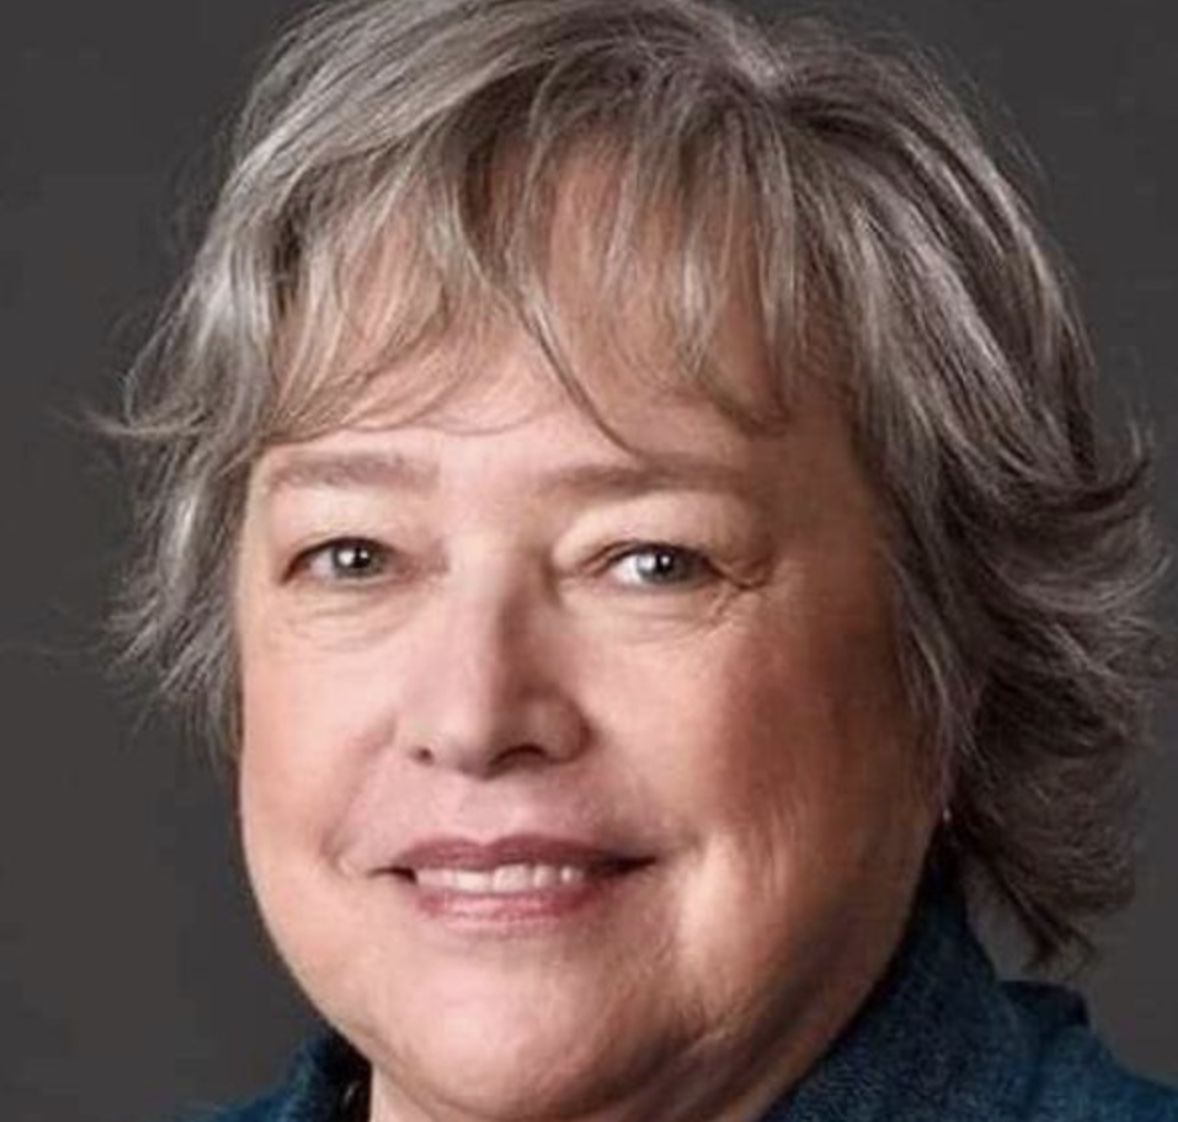 Kathy Bates: A Story of Strength and Resilience